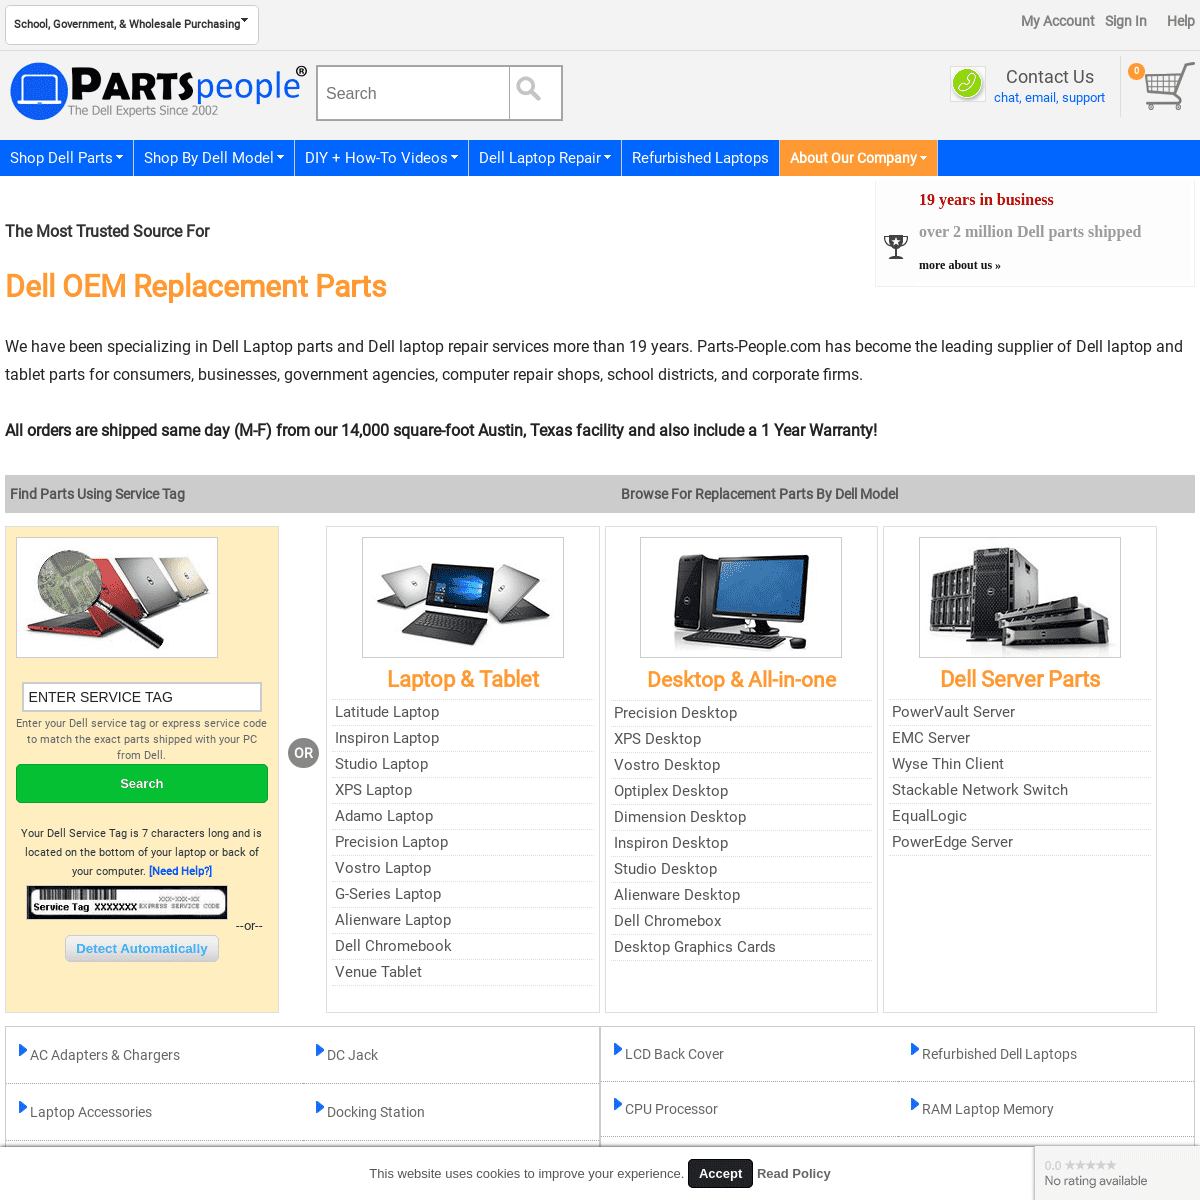 A complete backup of https://parts-people.com